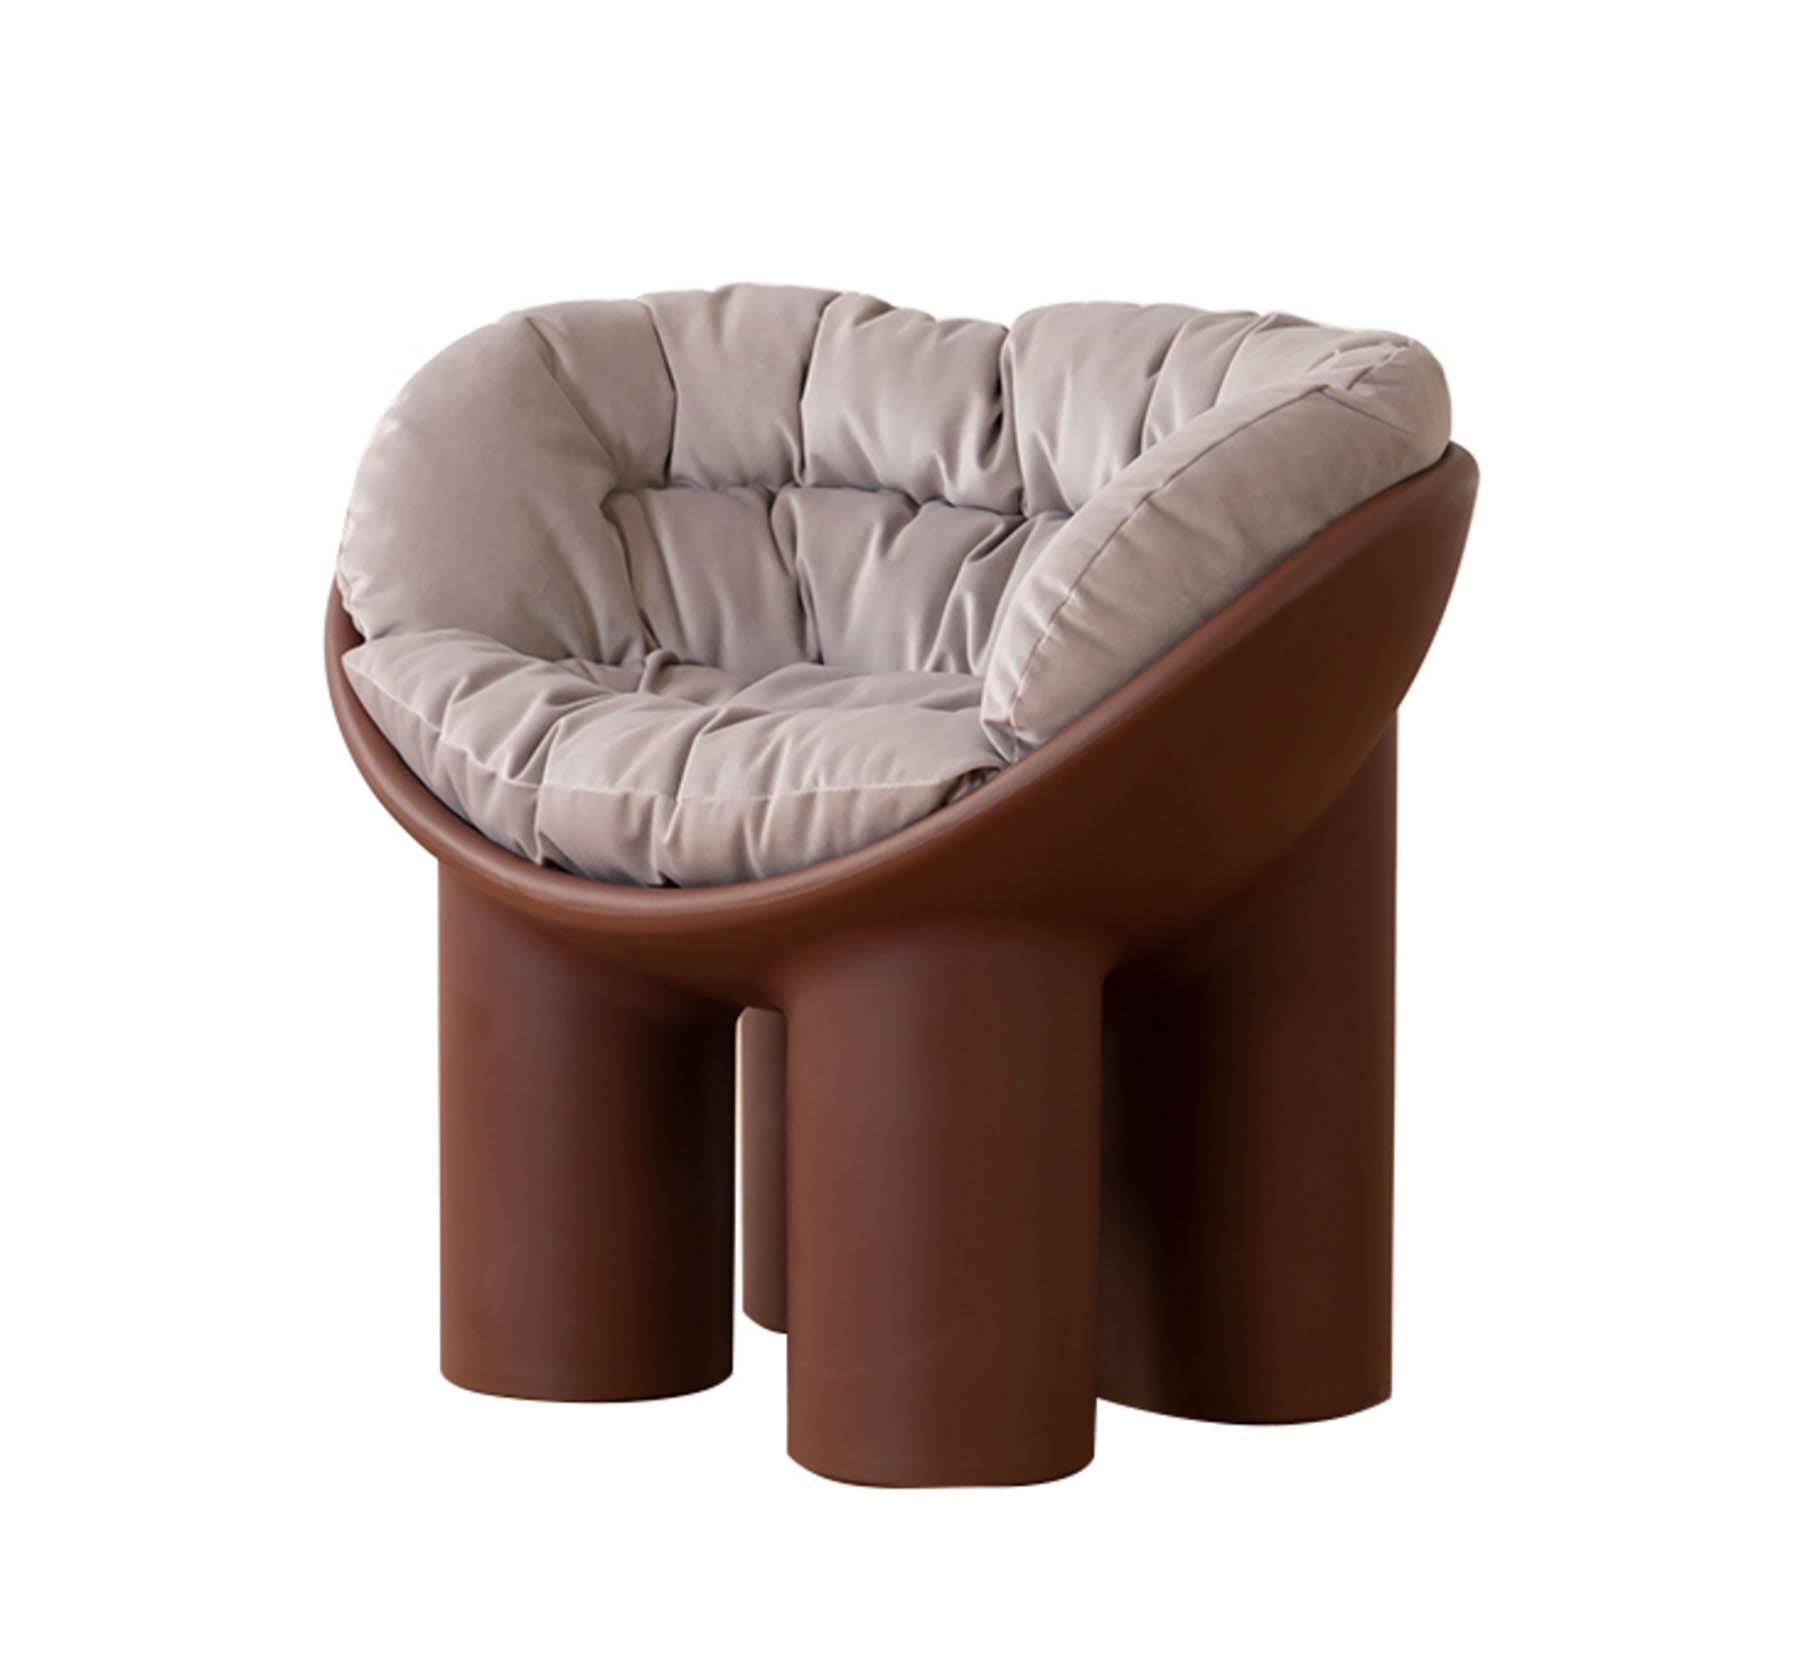 Riala Roly Poly Chair - Brown